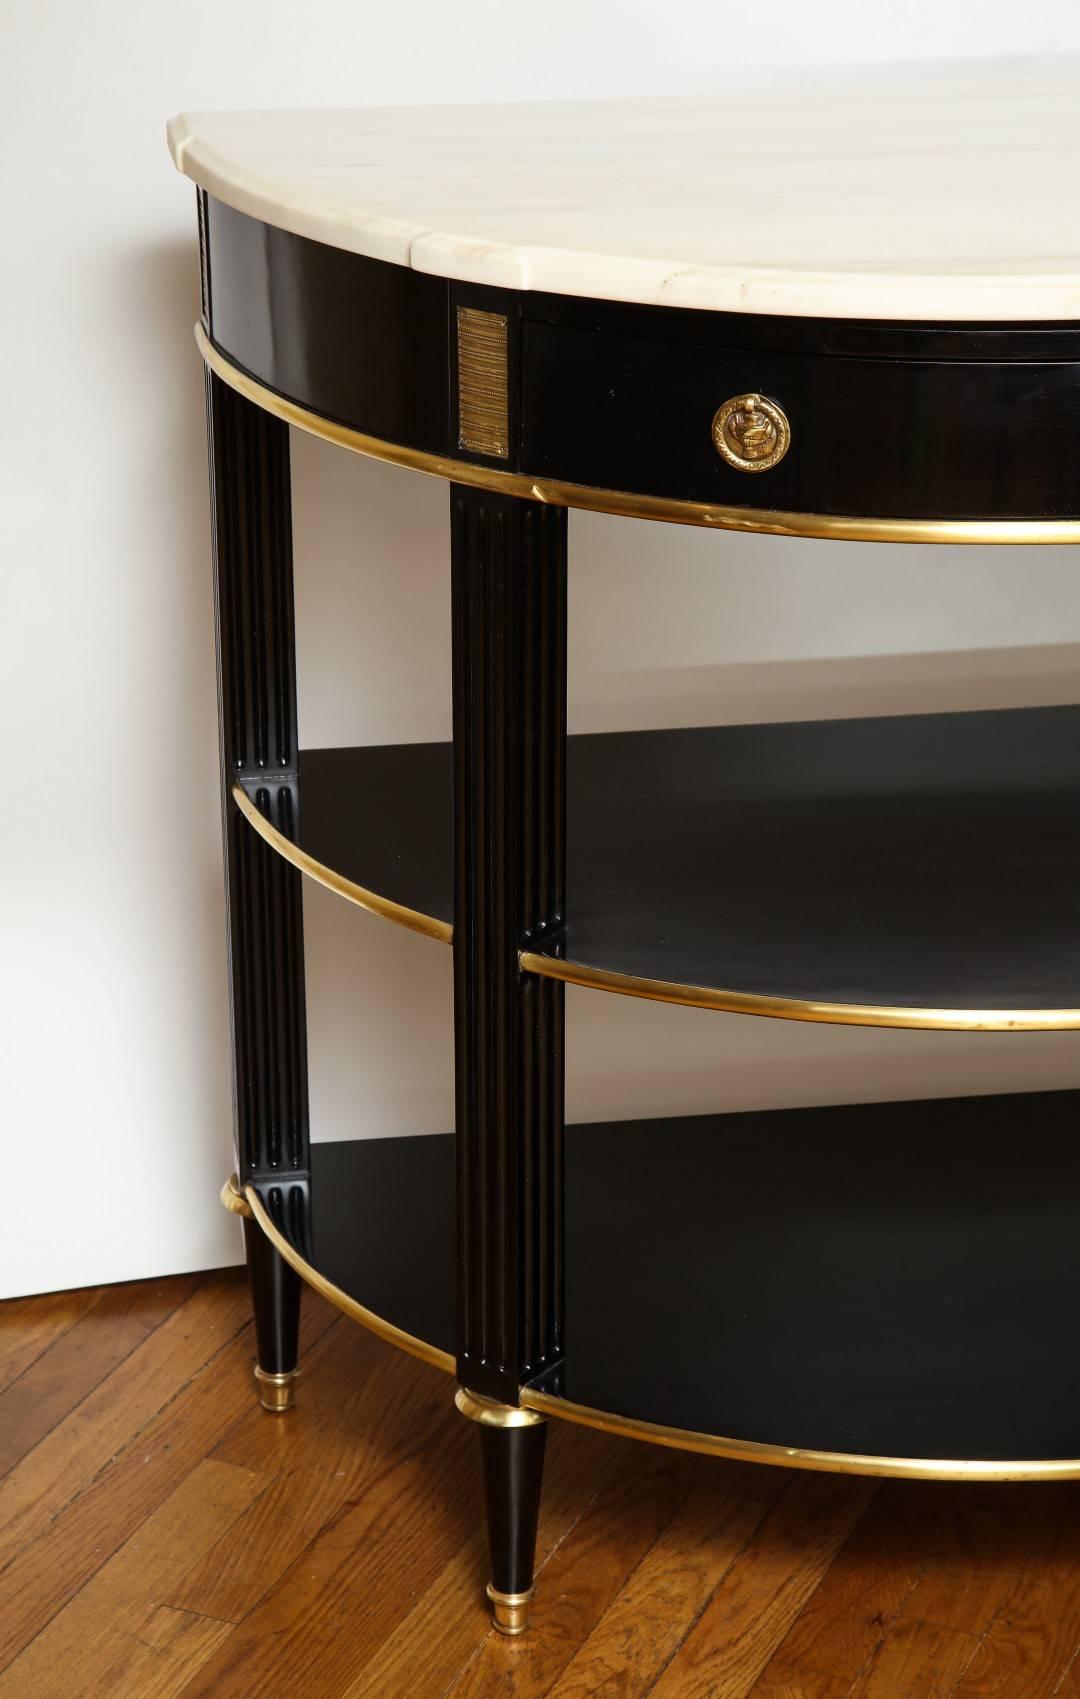 A French ebonized brass mounted console dessert, the new white marble top resting on a frieze with a faux drawer and ring handles, the reeded legs with brass collars terminating in toupie feet, newly ebonized walnut carcass with French polish finish